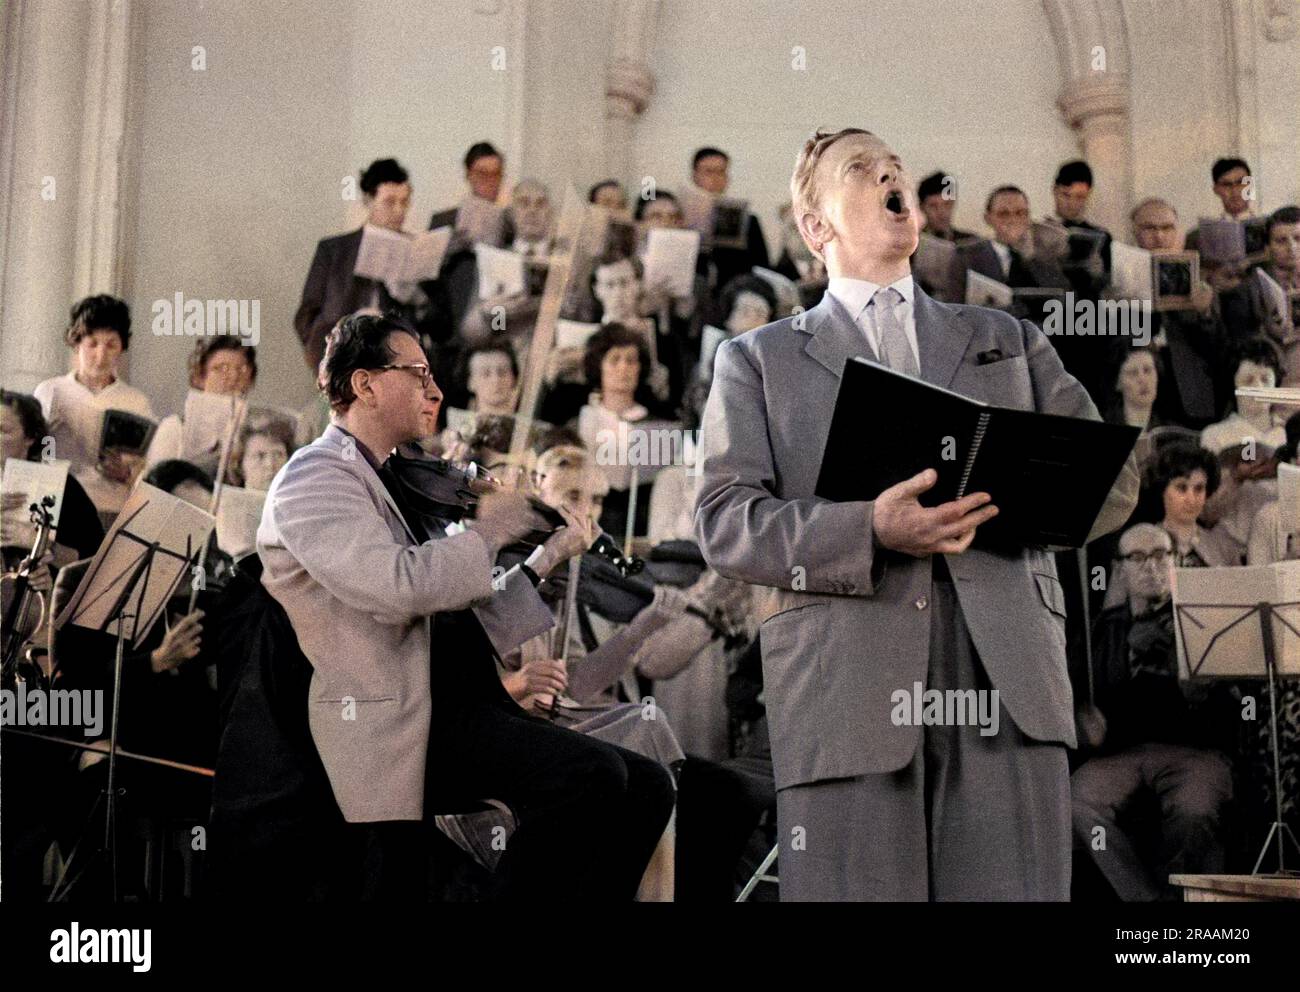 Peter Pears rehearsing the title role in Britten's Saint Nicolas at Orford Church, 23 June 1963.  The Aldeburgh Festival Choir and the choir pf Ipswich High School for Girls fills the background, with Emanuel Hurwitz, left, leading the English Chamber Orchestra     Date: 1963 Stock Photo